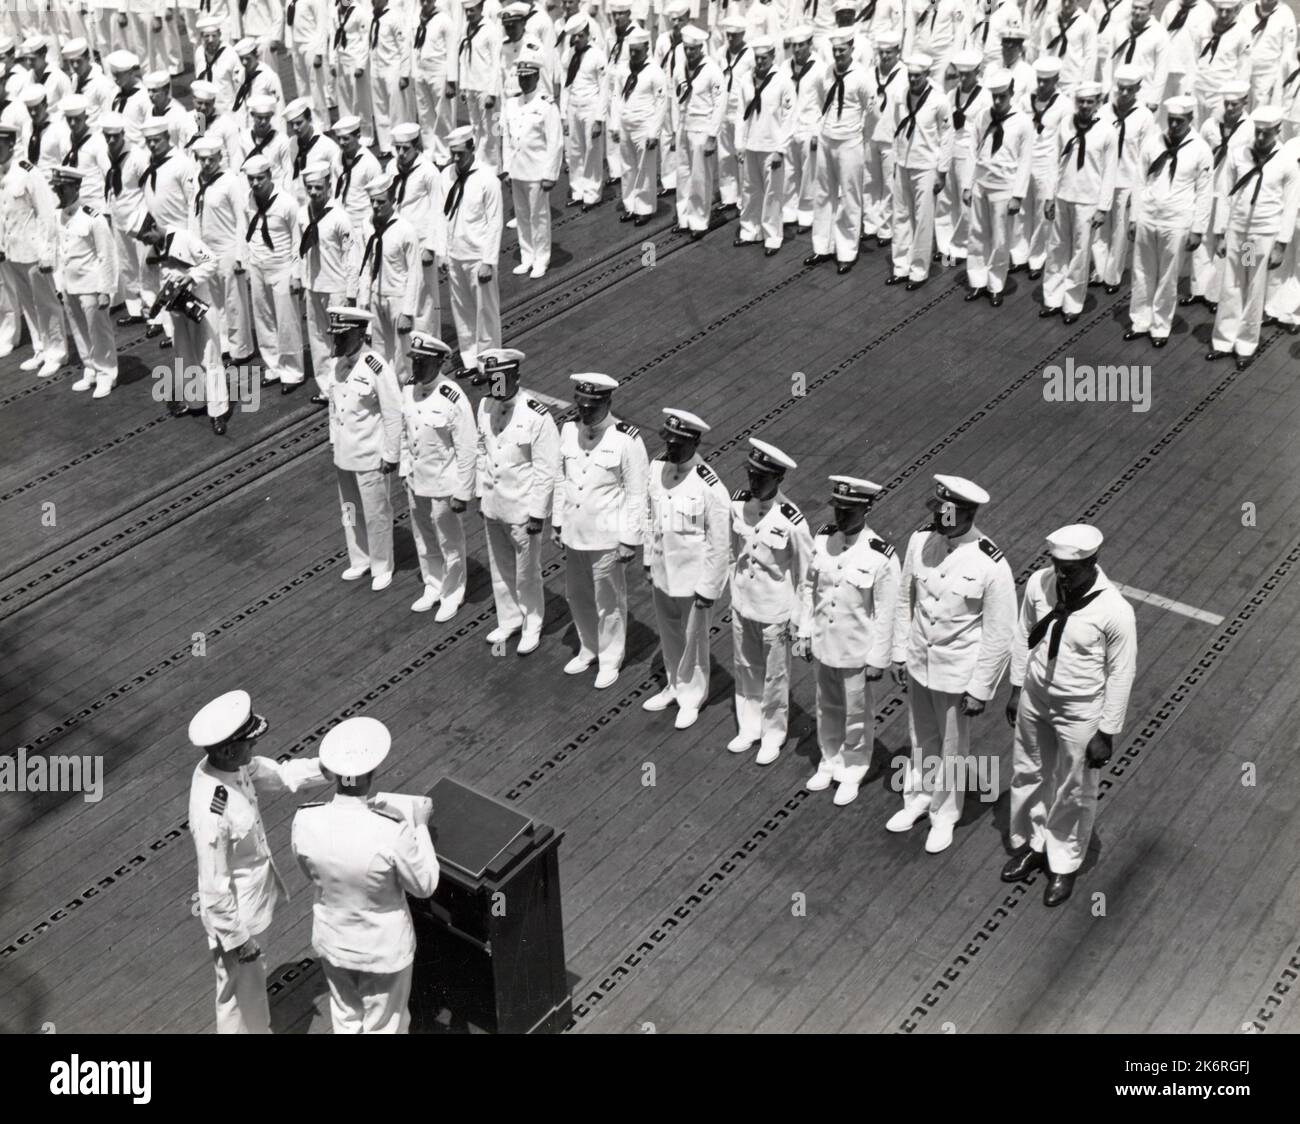 Naval Officers and Enlisted Men Await Presentation of Individual Heroism'Naval officers and enlisted men await presentation of individual heroism awards by Adm. Chest W. Nimitz at Pearl Harbor. The ceremony was held on the flight deck of the USS Enterprise (CV-6).' Photographer: USS Enterprise. Stock Photo